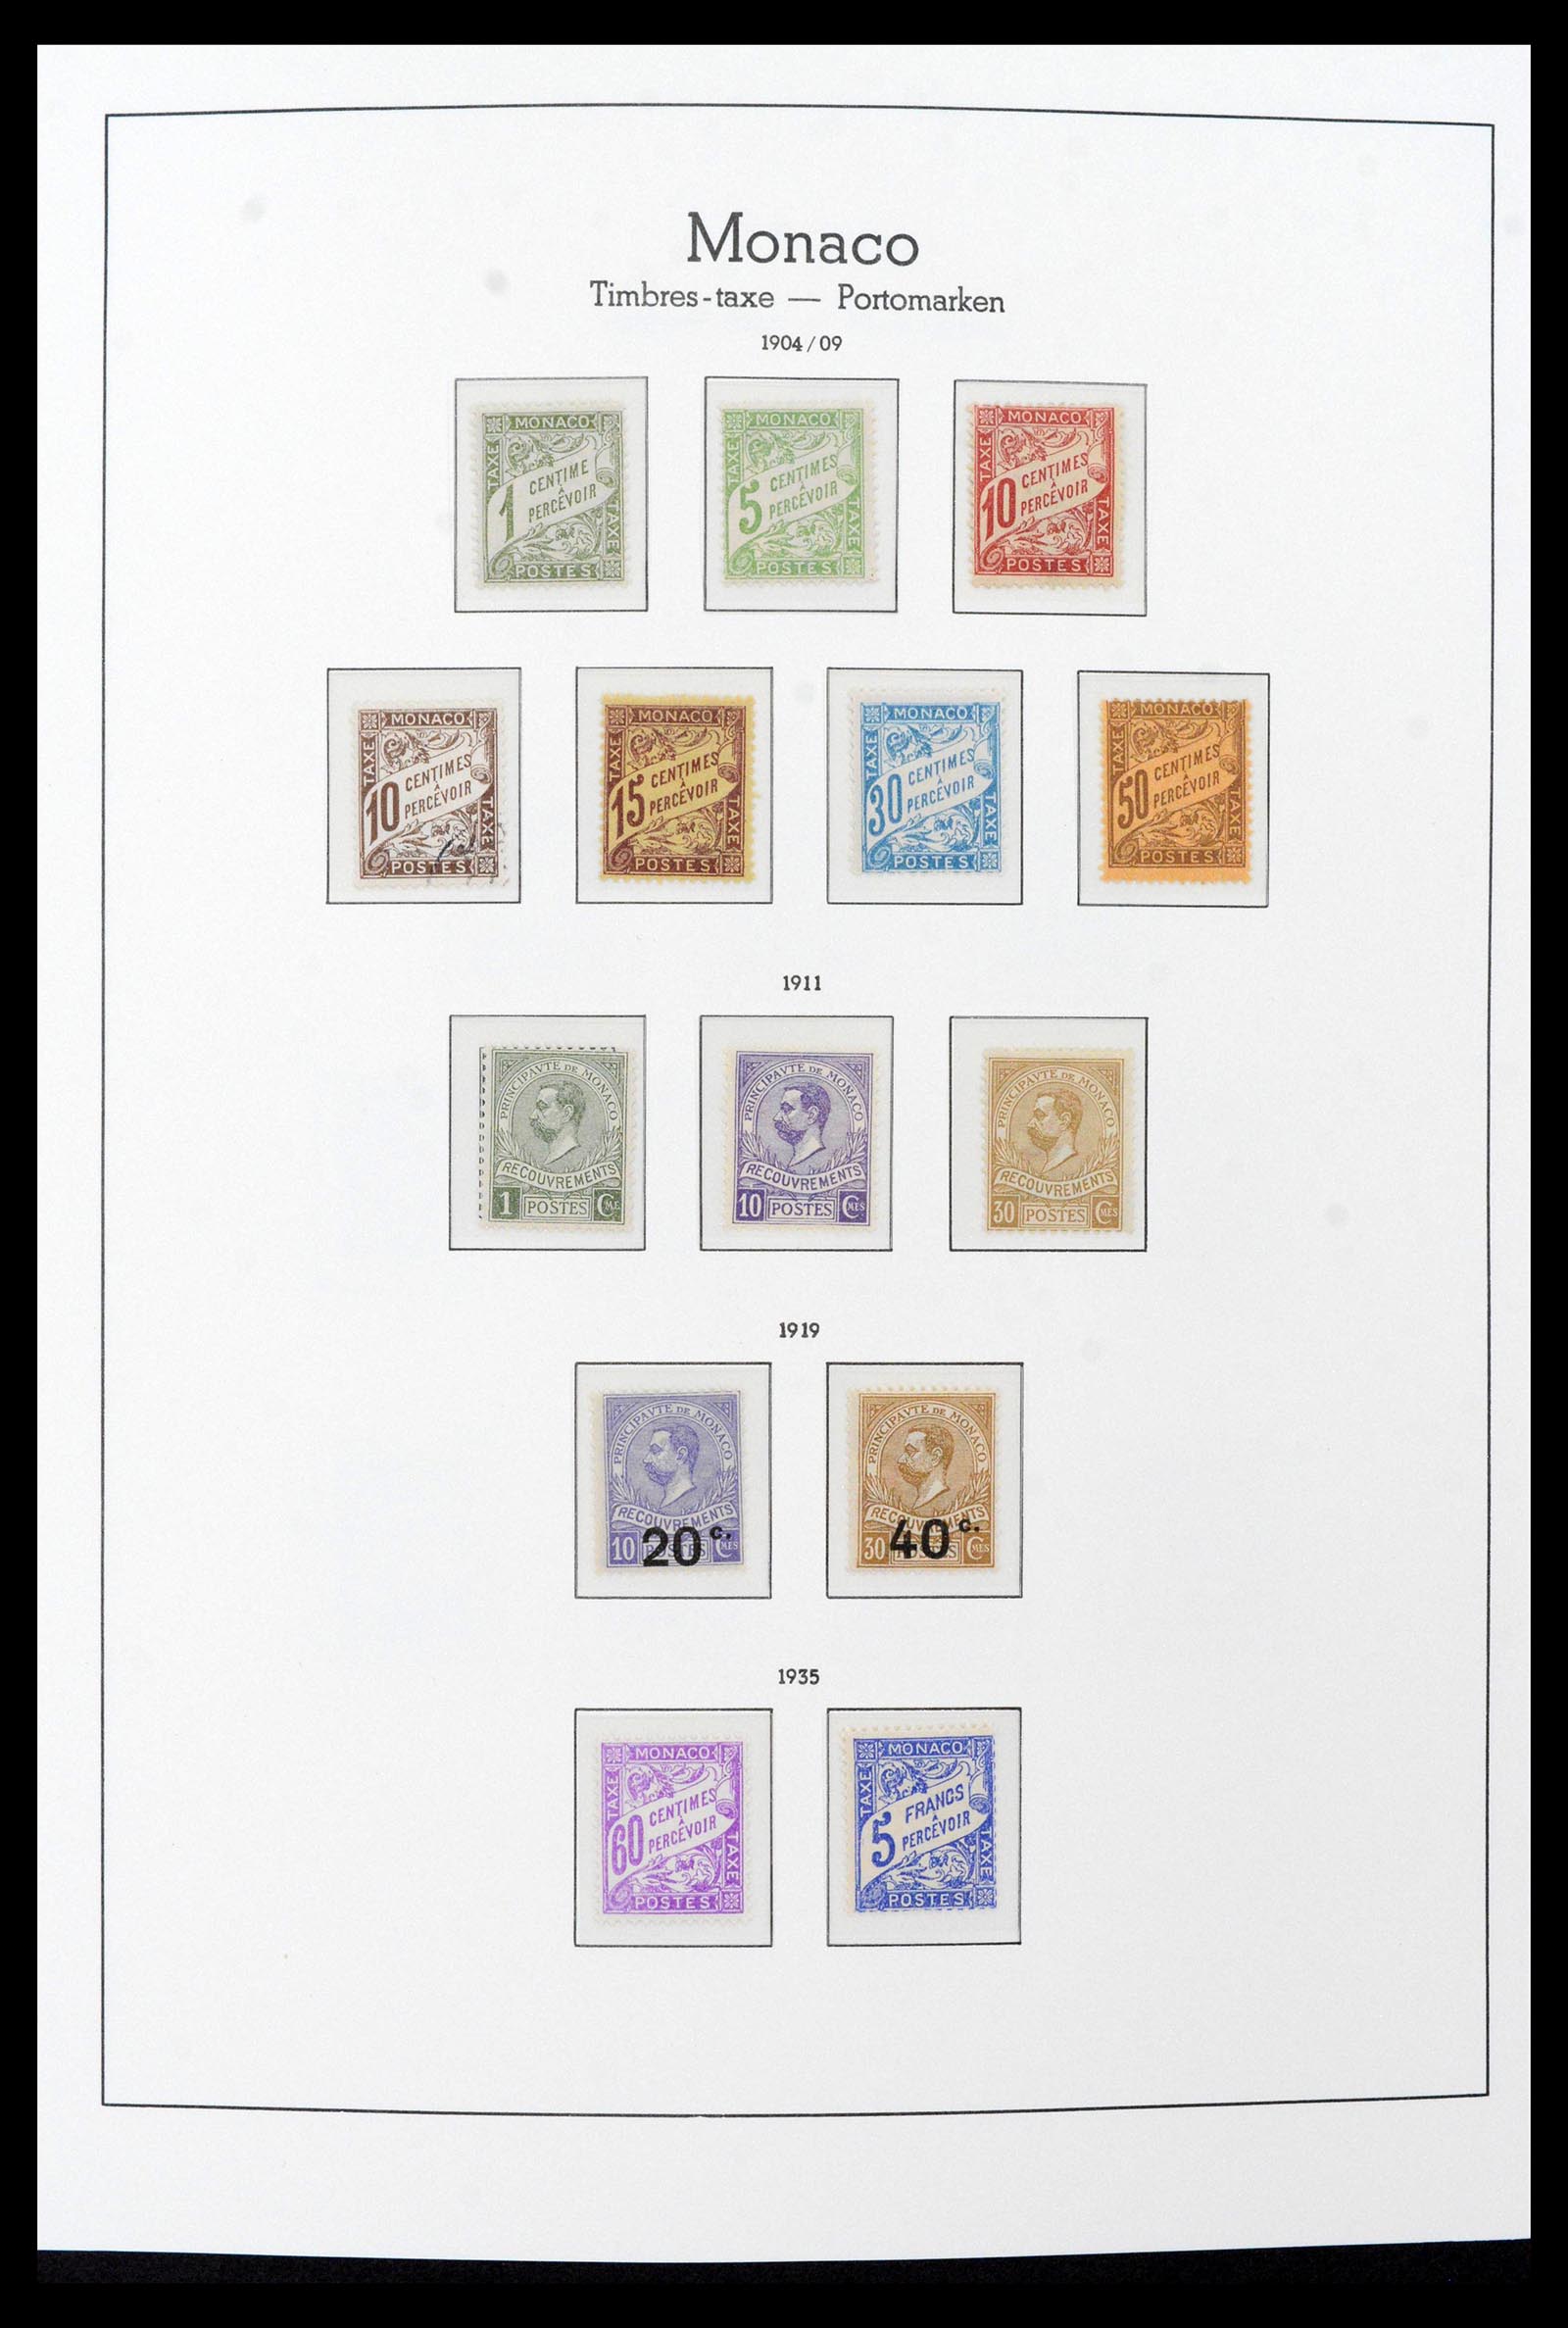 39390 0010 - Stamp collection 39390 Monaco complete 1885-1990.